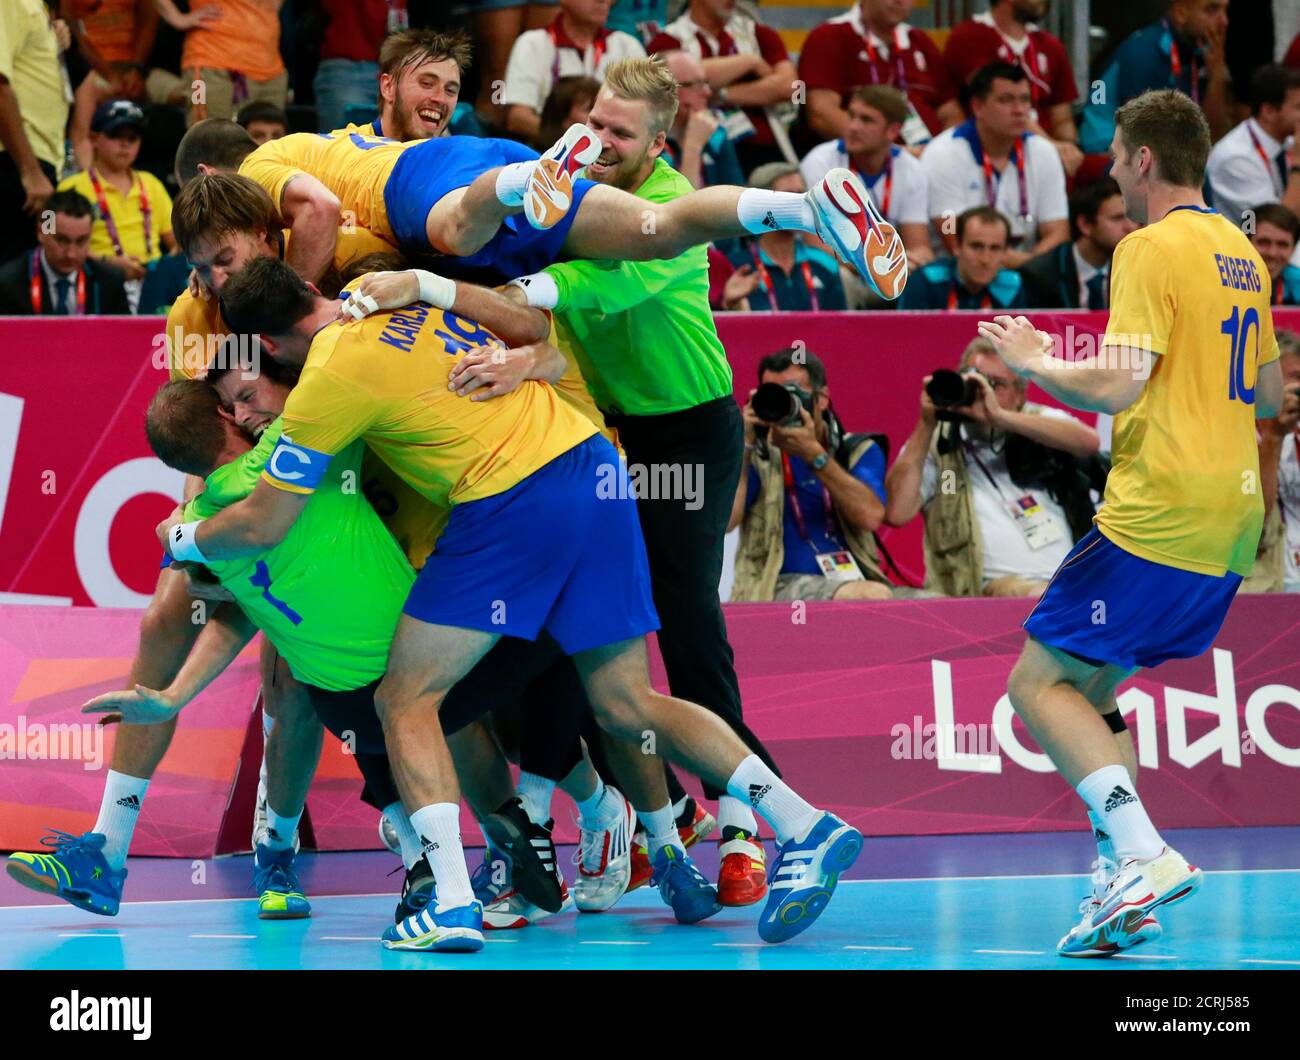 Sweden's team players celebrate after defeating Hungary in their men's semi-final match at the Basketball Arena during the London 2012 Olympic Games August 10, 2012.       REUTERS/Adrees Latif (BRITAIN  - Tags: SPORT HANDBALL OLYMPICS) Stock Photo